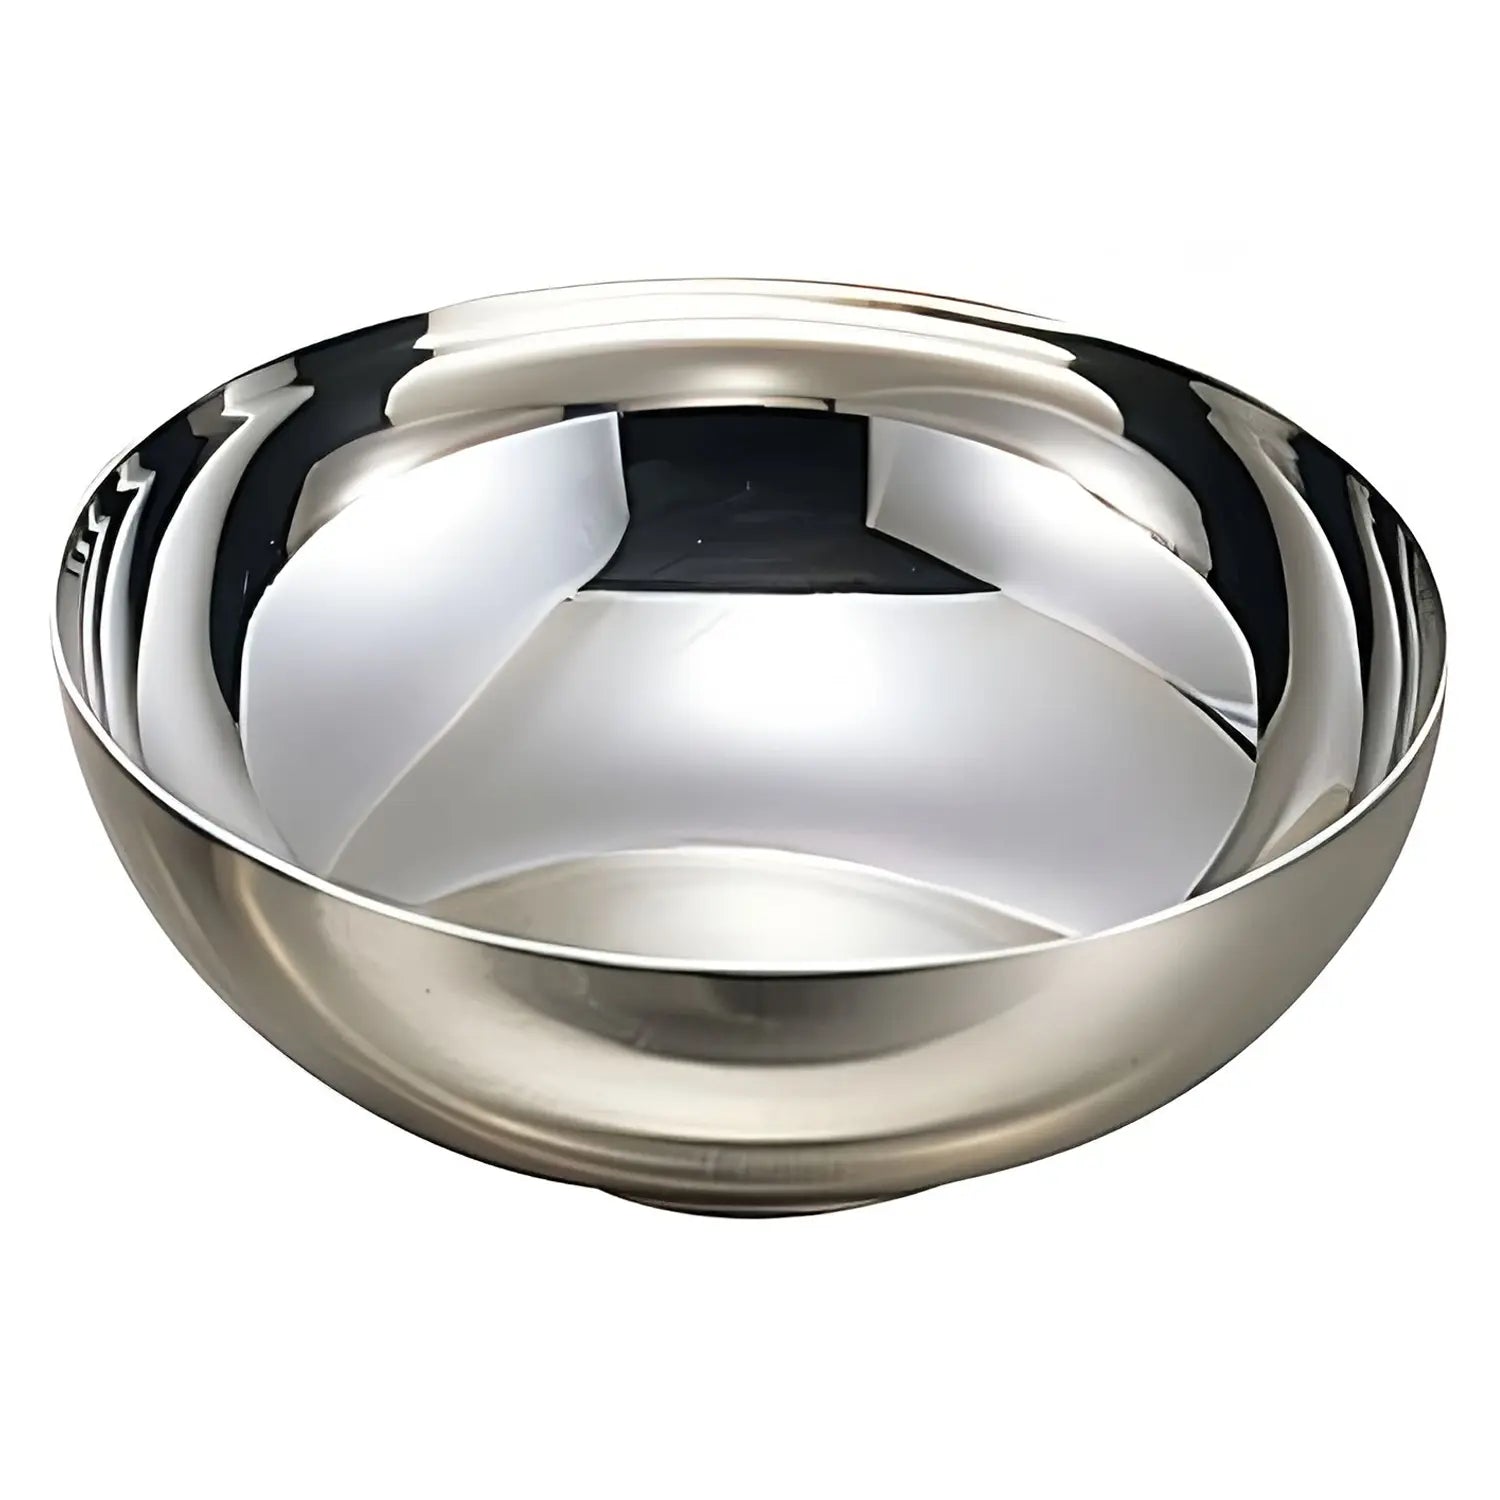 Insulated Double Walled Multipurpose Stainless Steel Bowl Set Soup Bowl  Korean - Buy Insulated Double Walled Multipurpose Stainless Steel Bowl Set Soup  Bowl Korean Product on